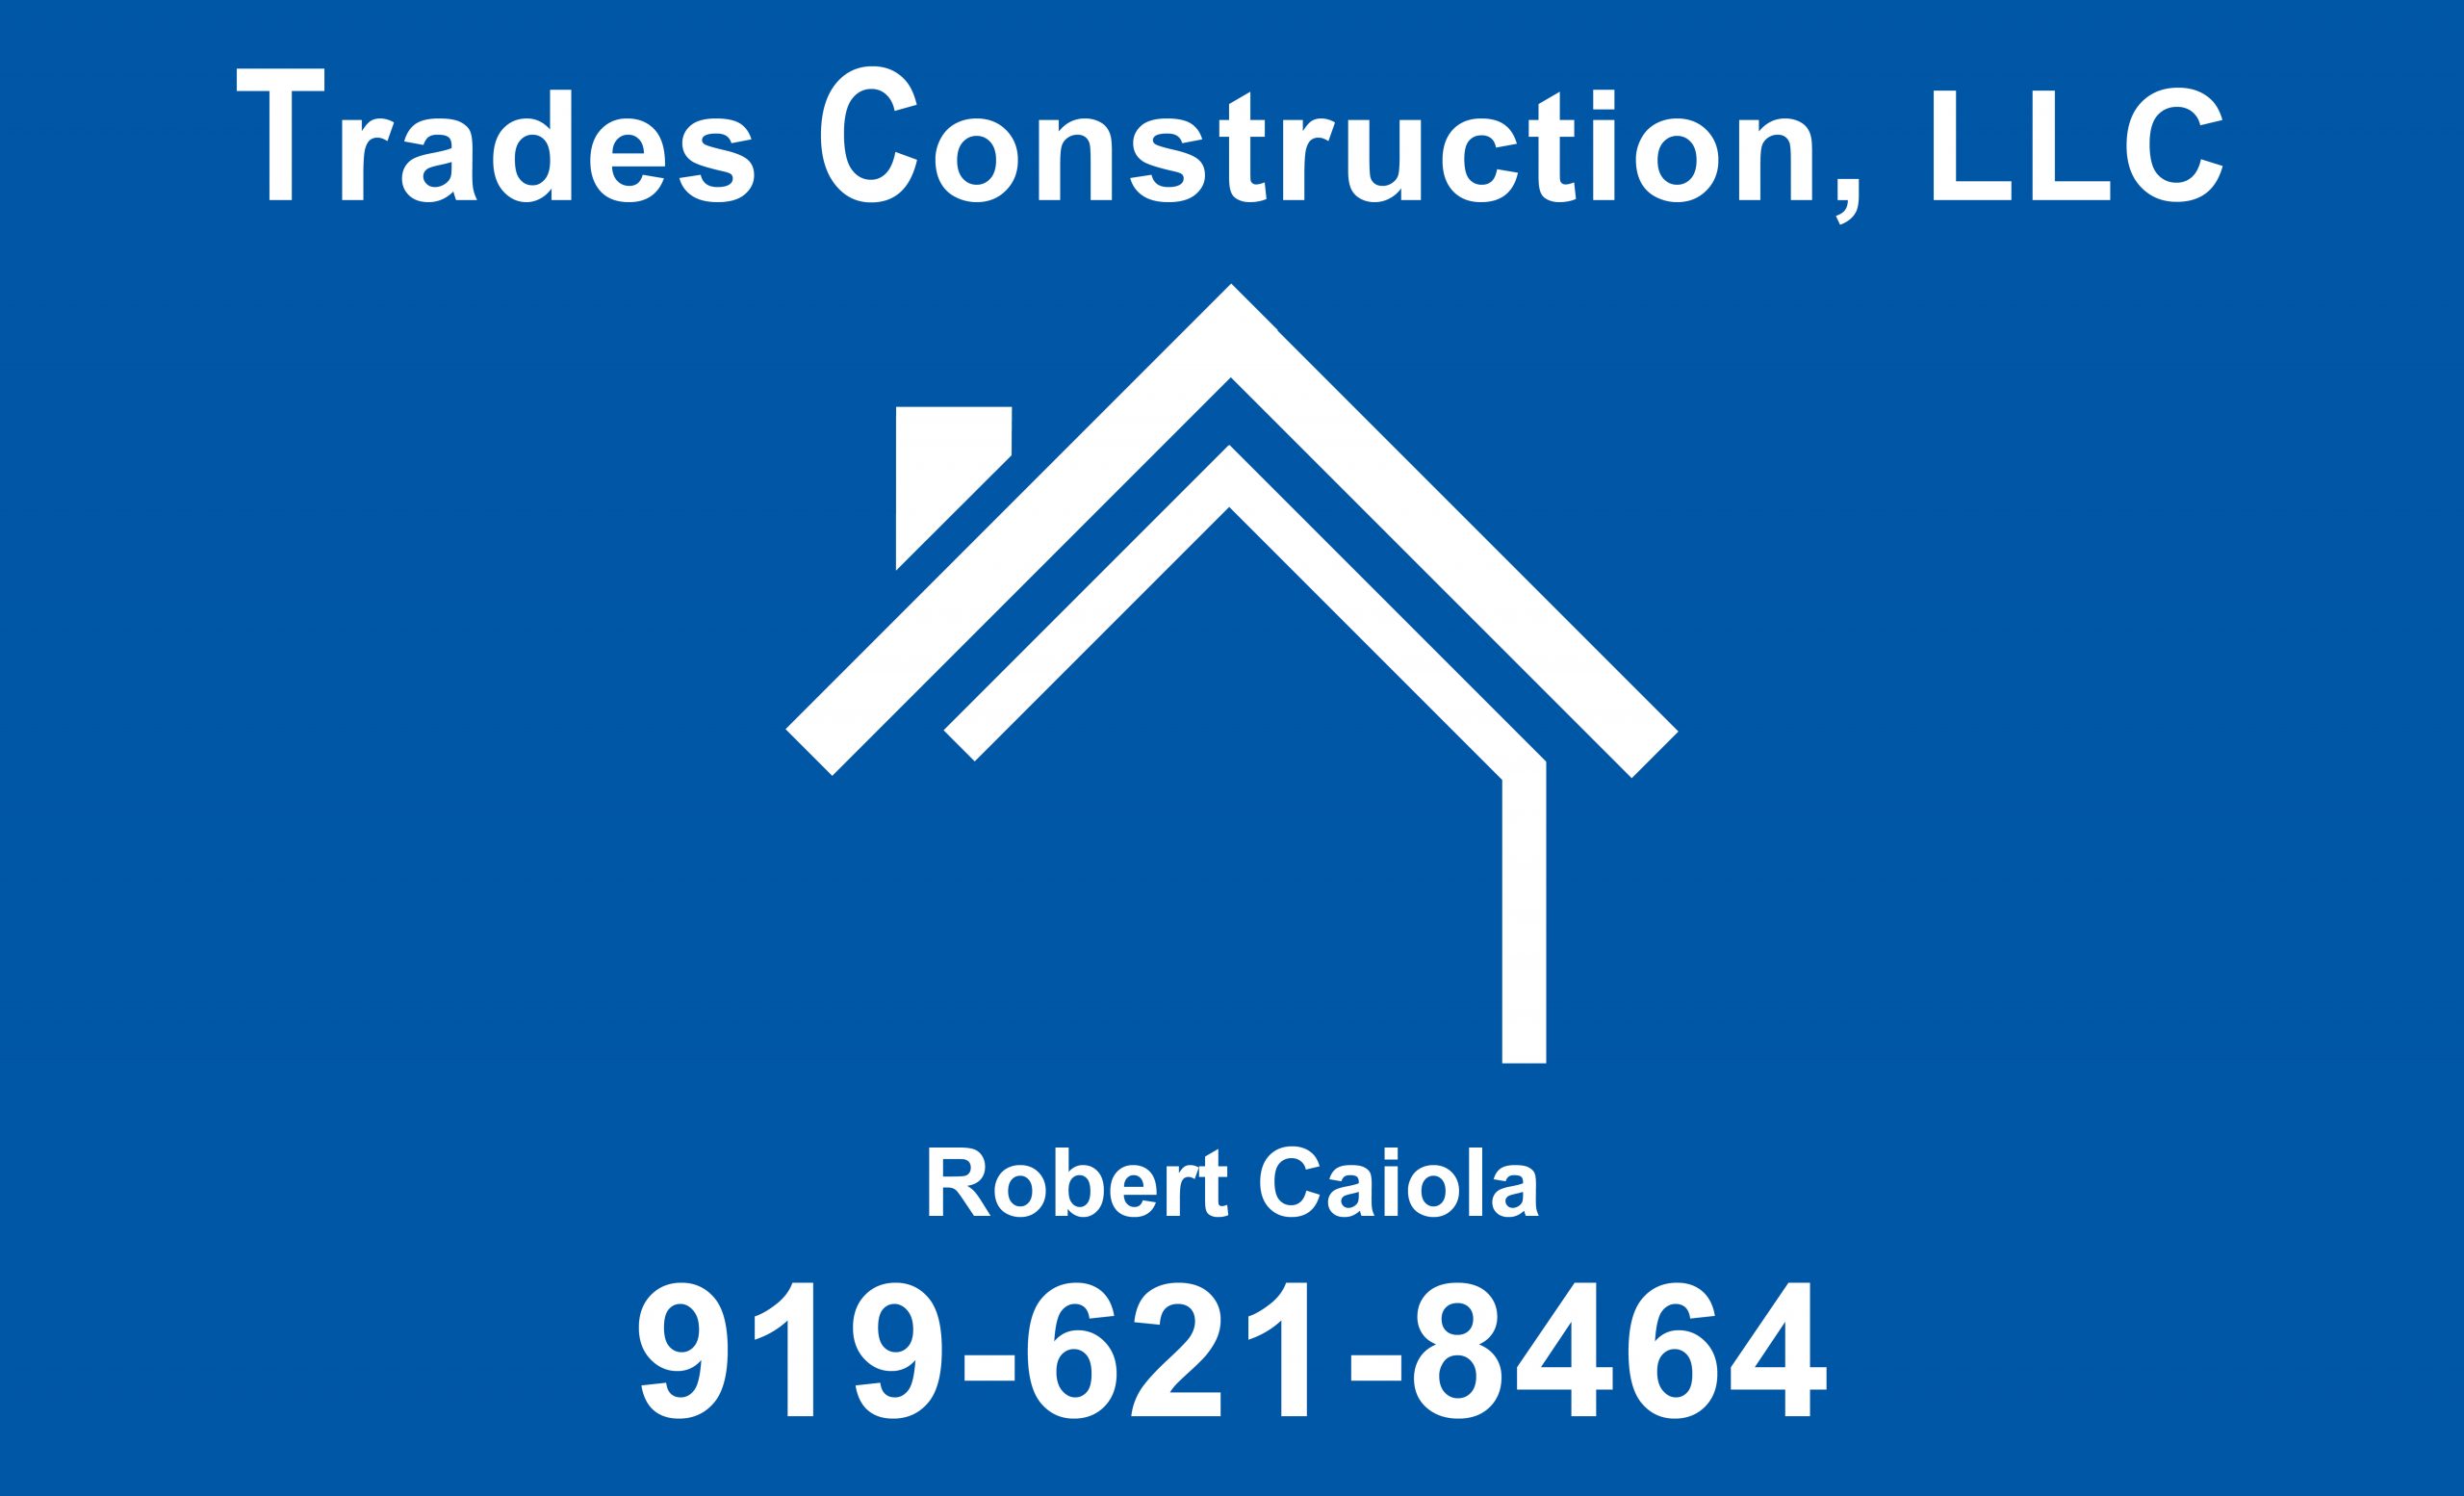 https://www.woodvalleysrc.com/wp-content/uploads/2024/05/Trades-Construction-logo-REVISED-2-scaled.jpg